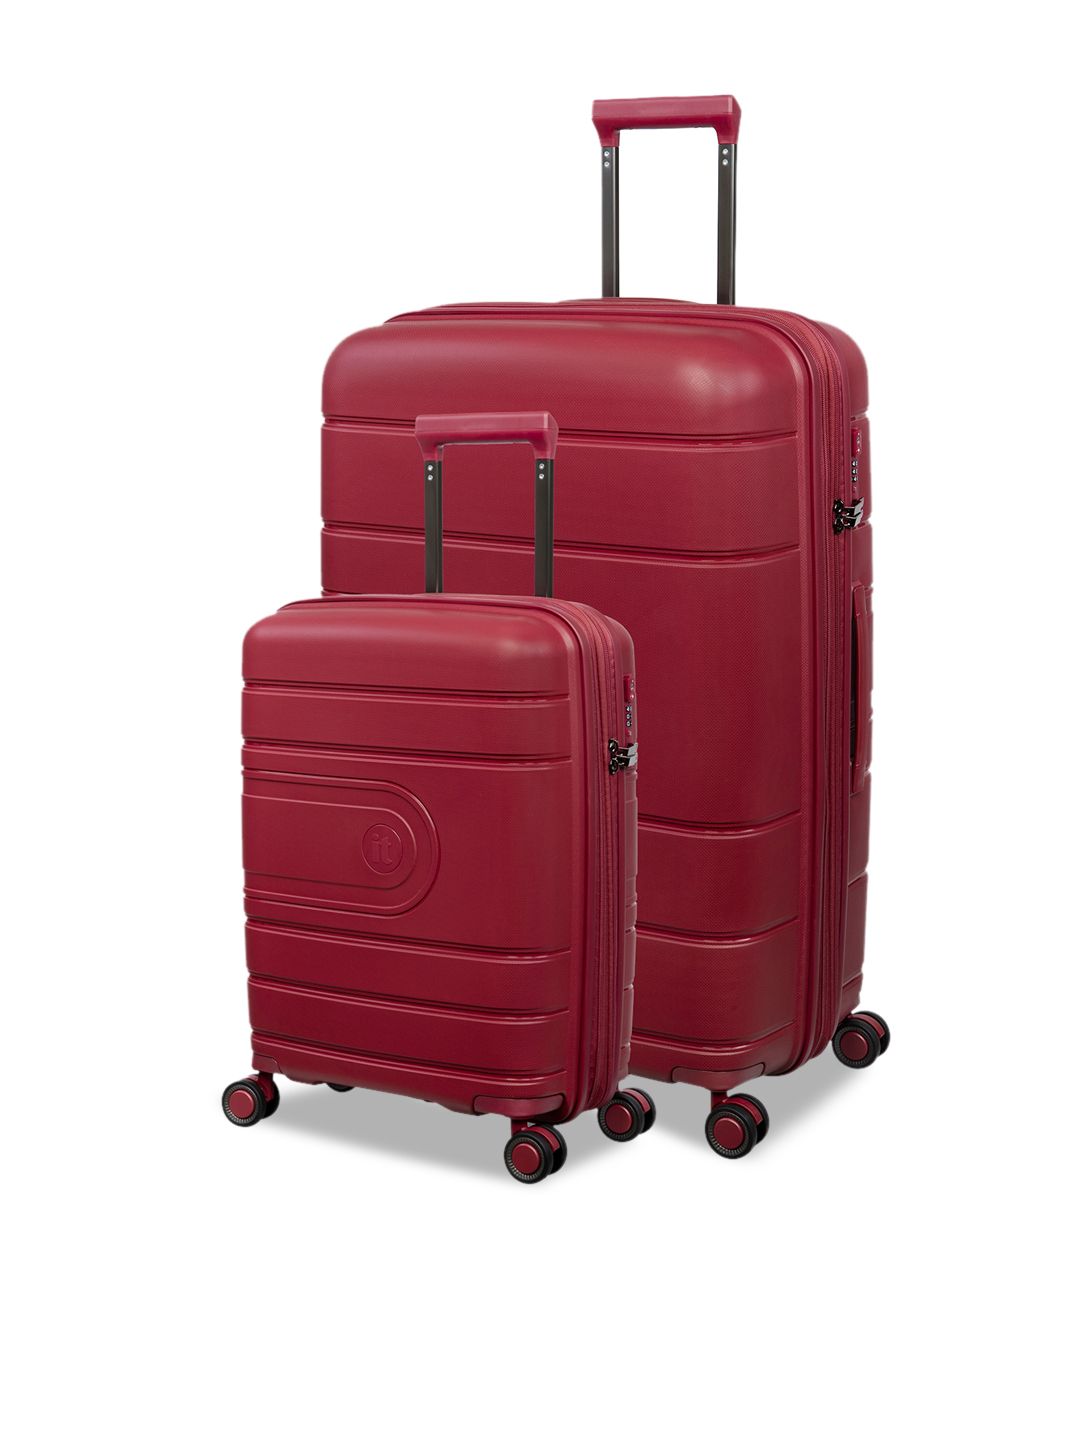 IT luggage Set Of 2 Red Patterned 360-Degree Rotation Hard-Sided Trolley Bag Price in India